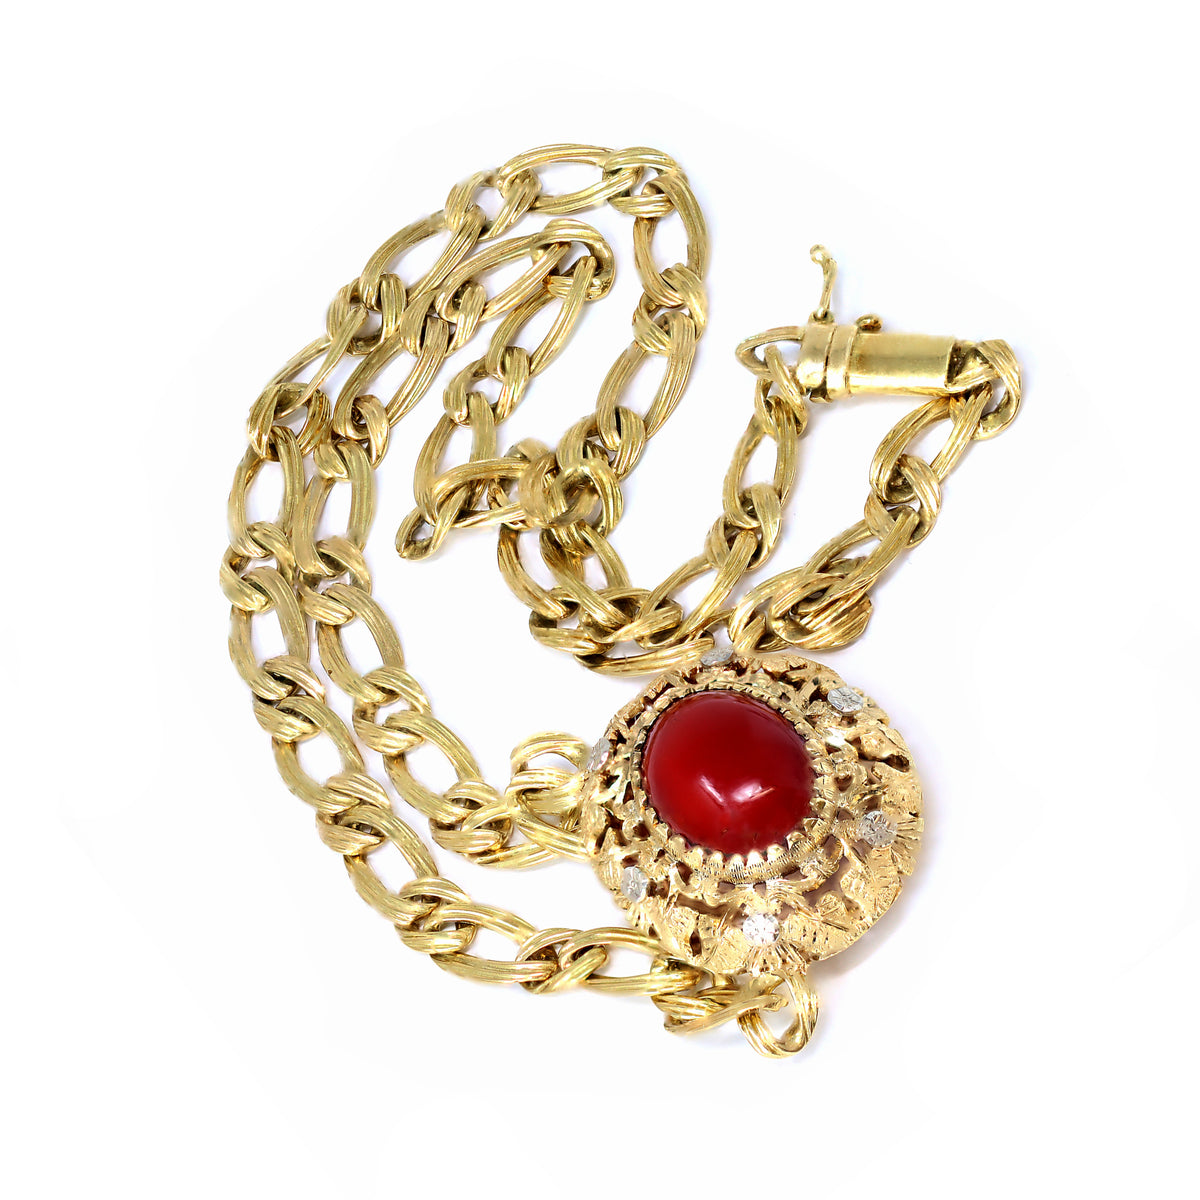 1960s-italian-oxblood-cabochon-coral-and-18-karat-yellow-gold-necklace-coral-clasp-view-2000x2000